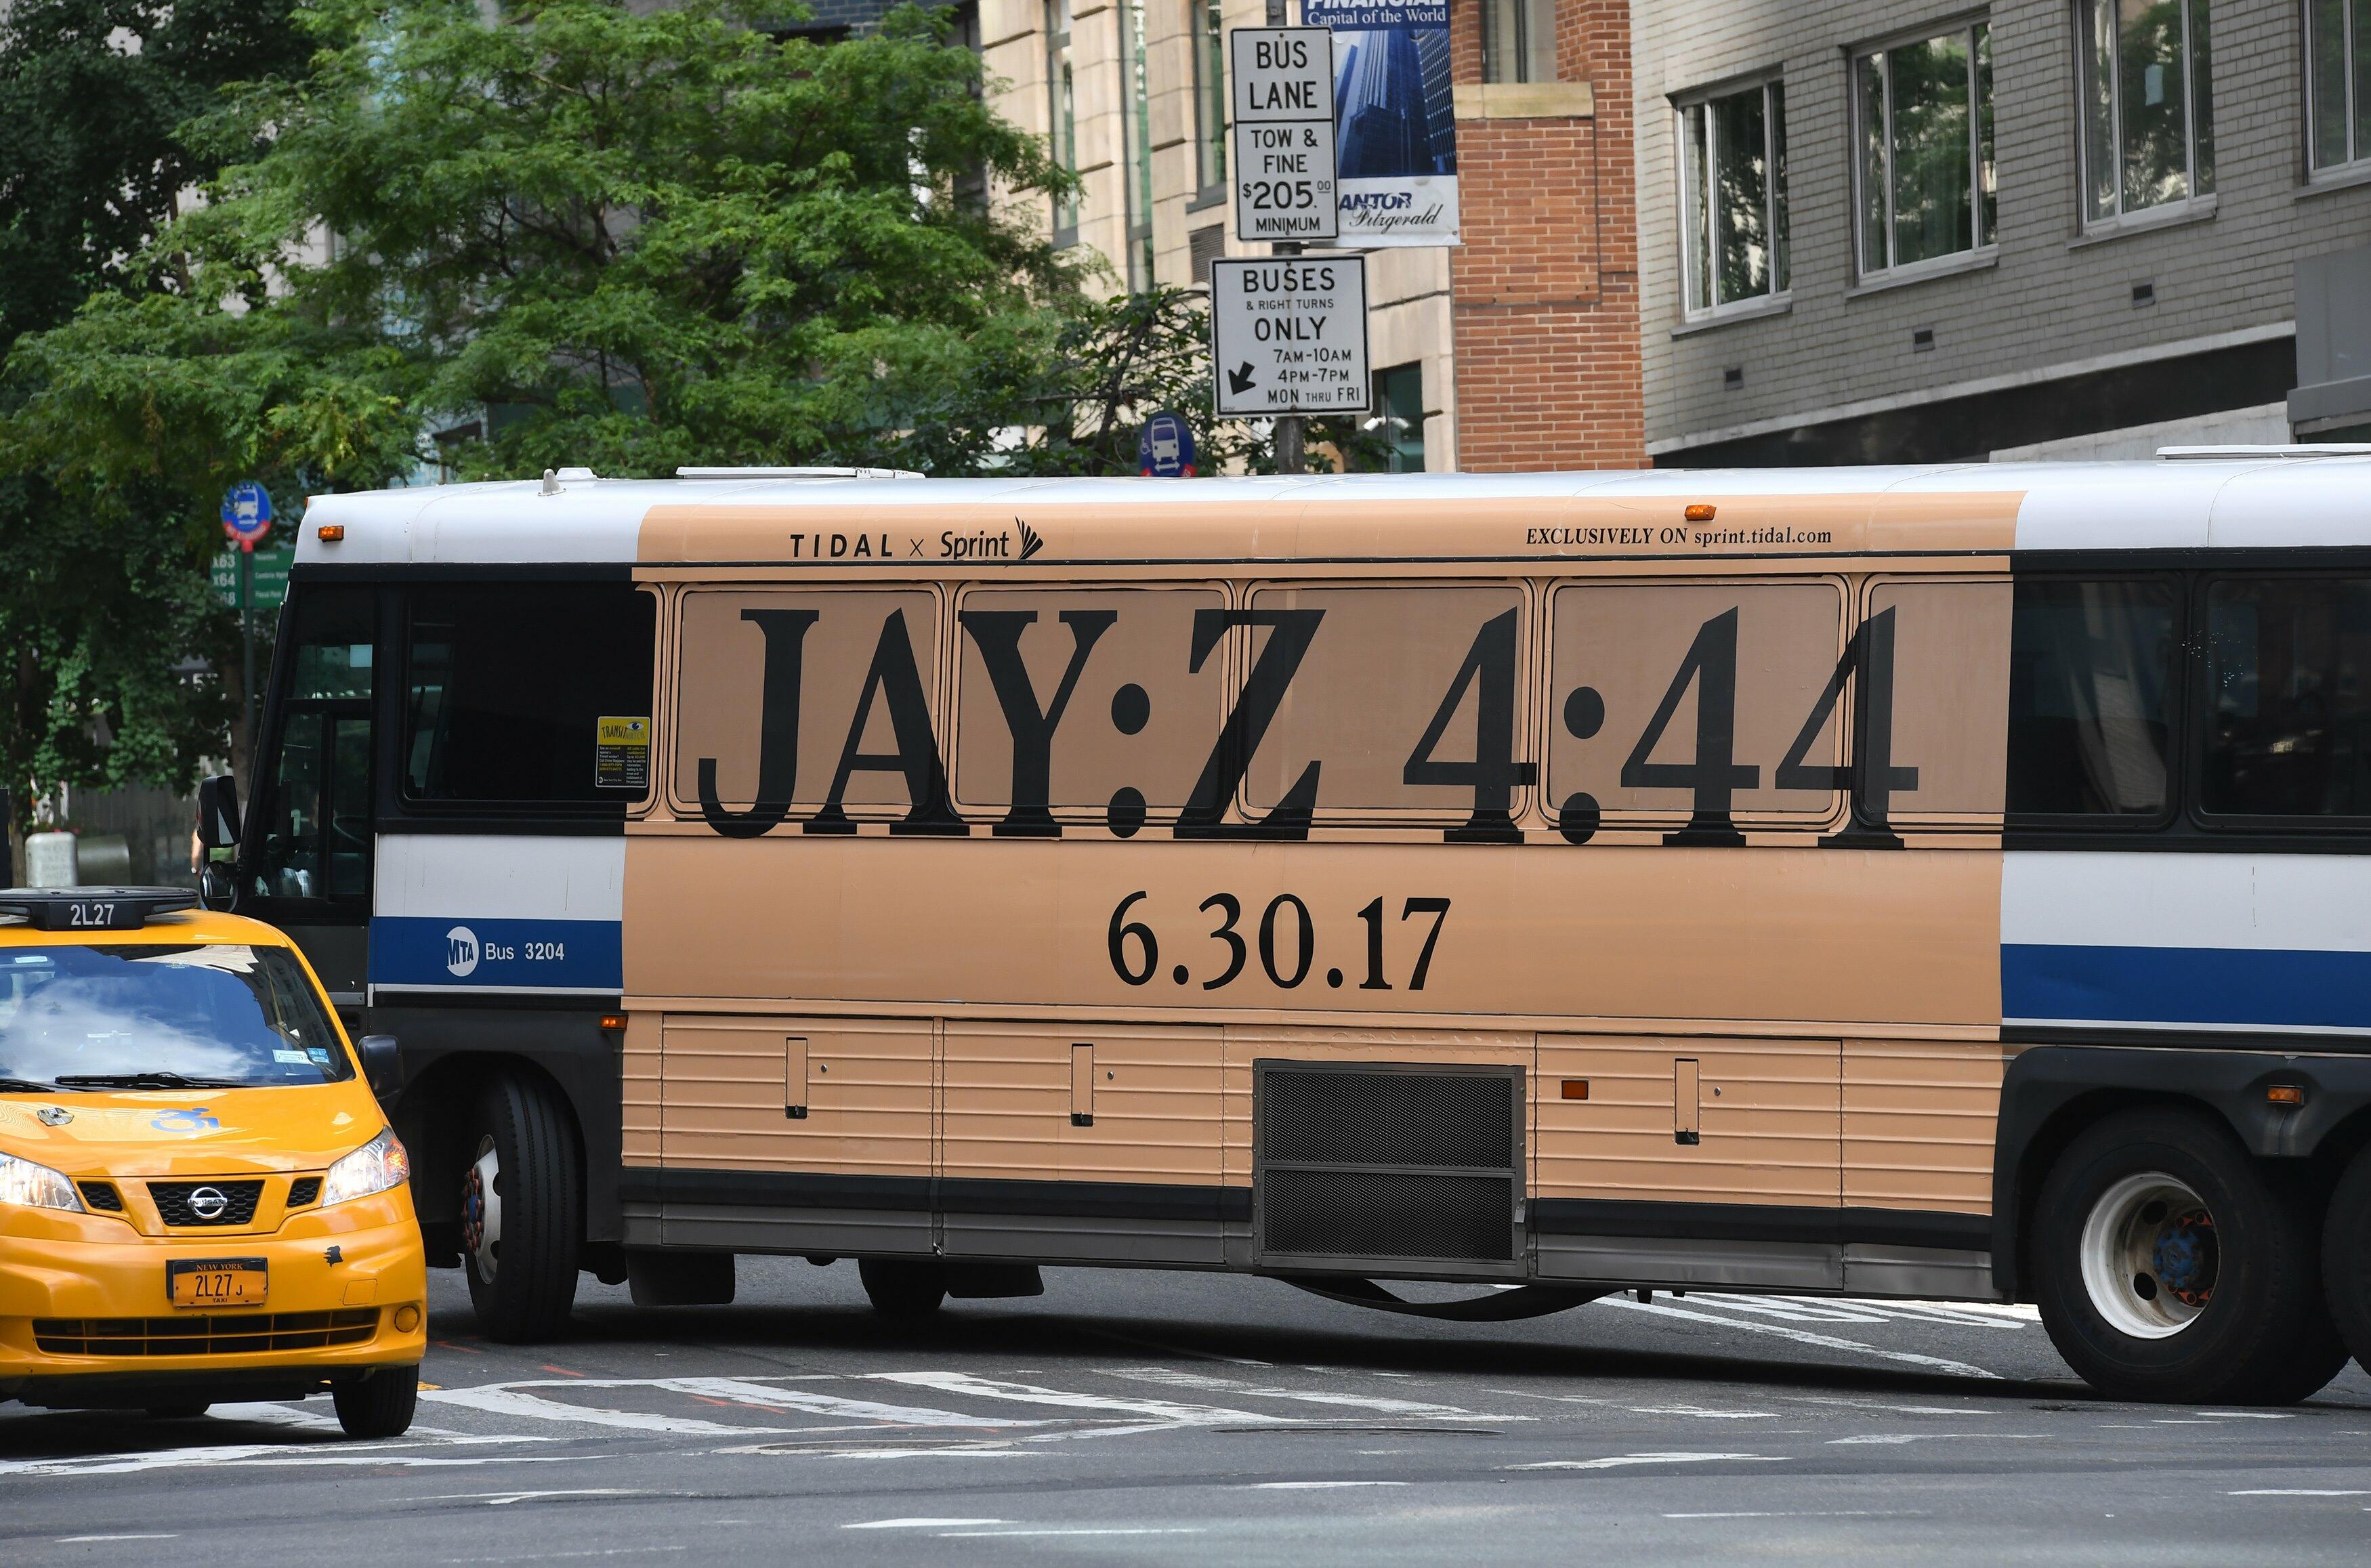 In this photo taken June 26, 2017, a New York City bus with an advertisement for Jay-Z's anticipated new album 